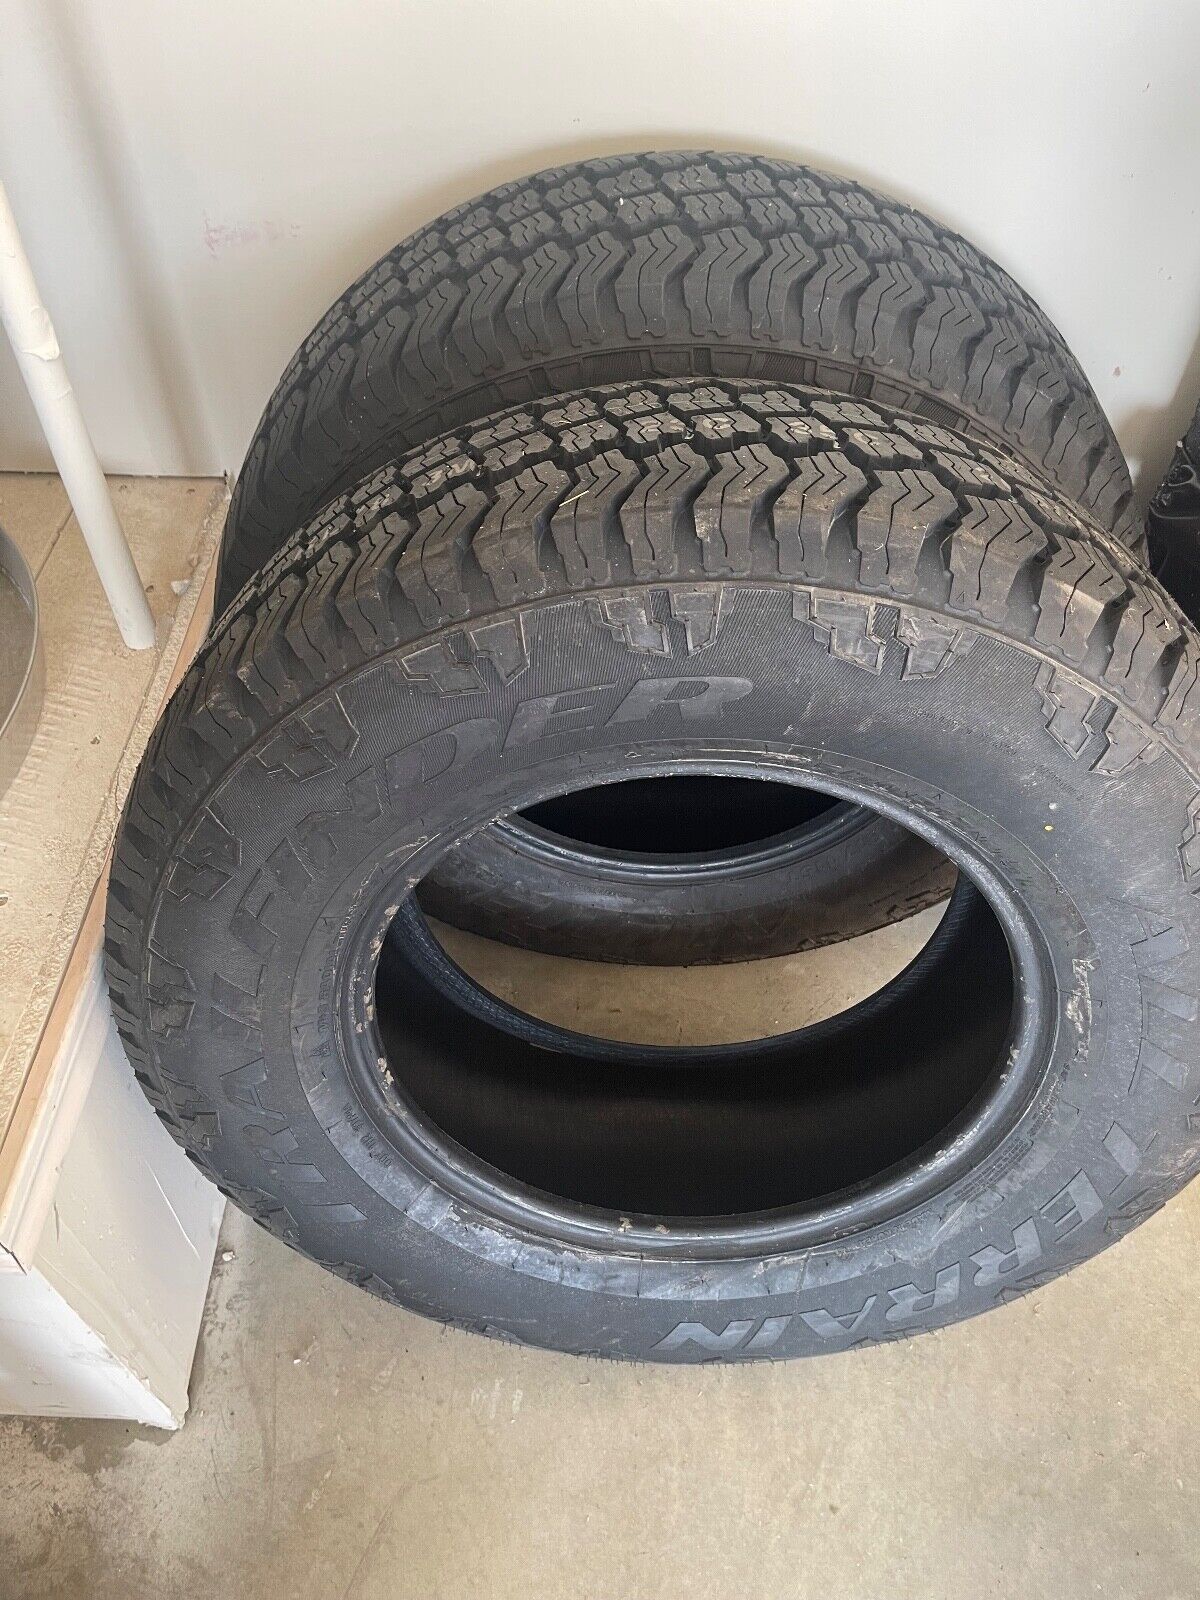 Brand New Tires Purchased for an 04 Ford Expedition. Size 265/70/R17 